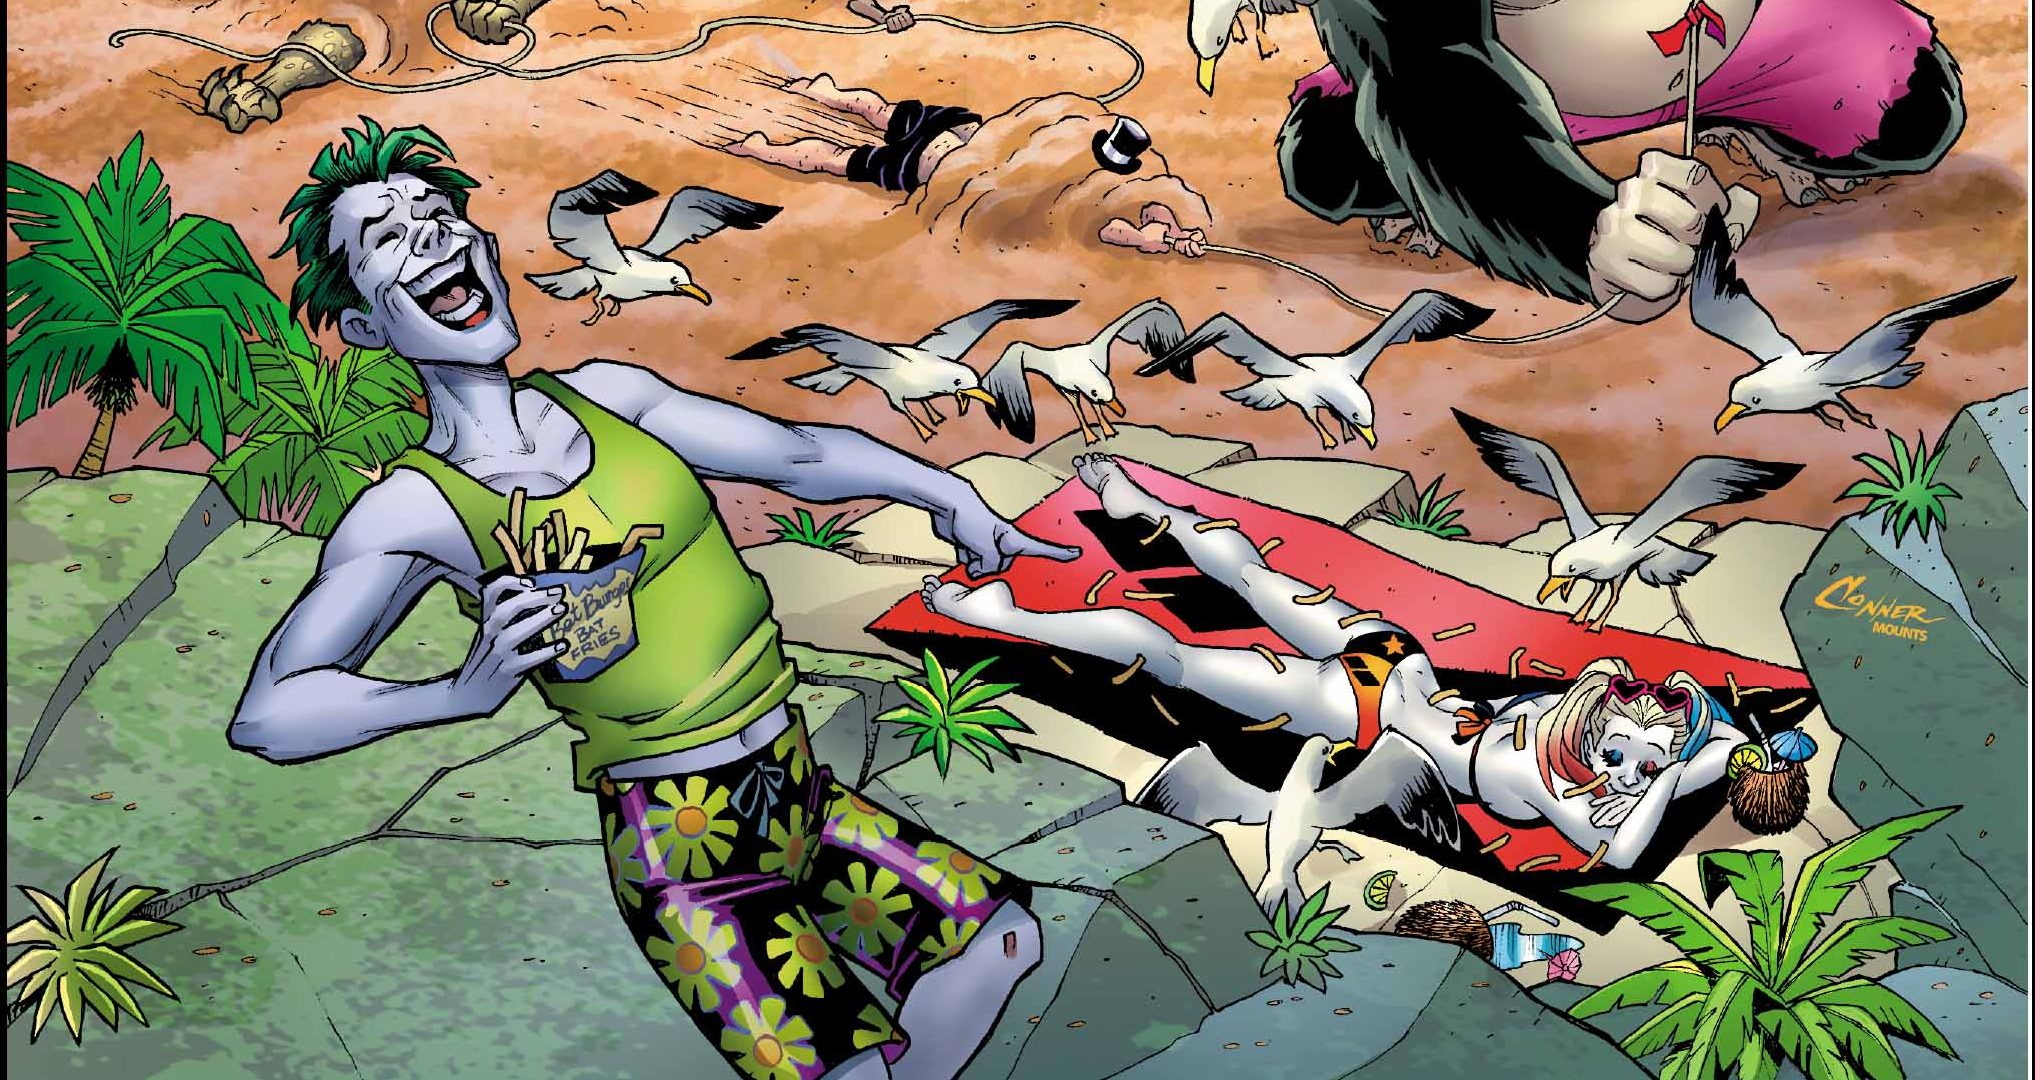 DC's Beach Blanket Bad Guys Summer Special #1 review: Hot fun in the summertime